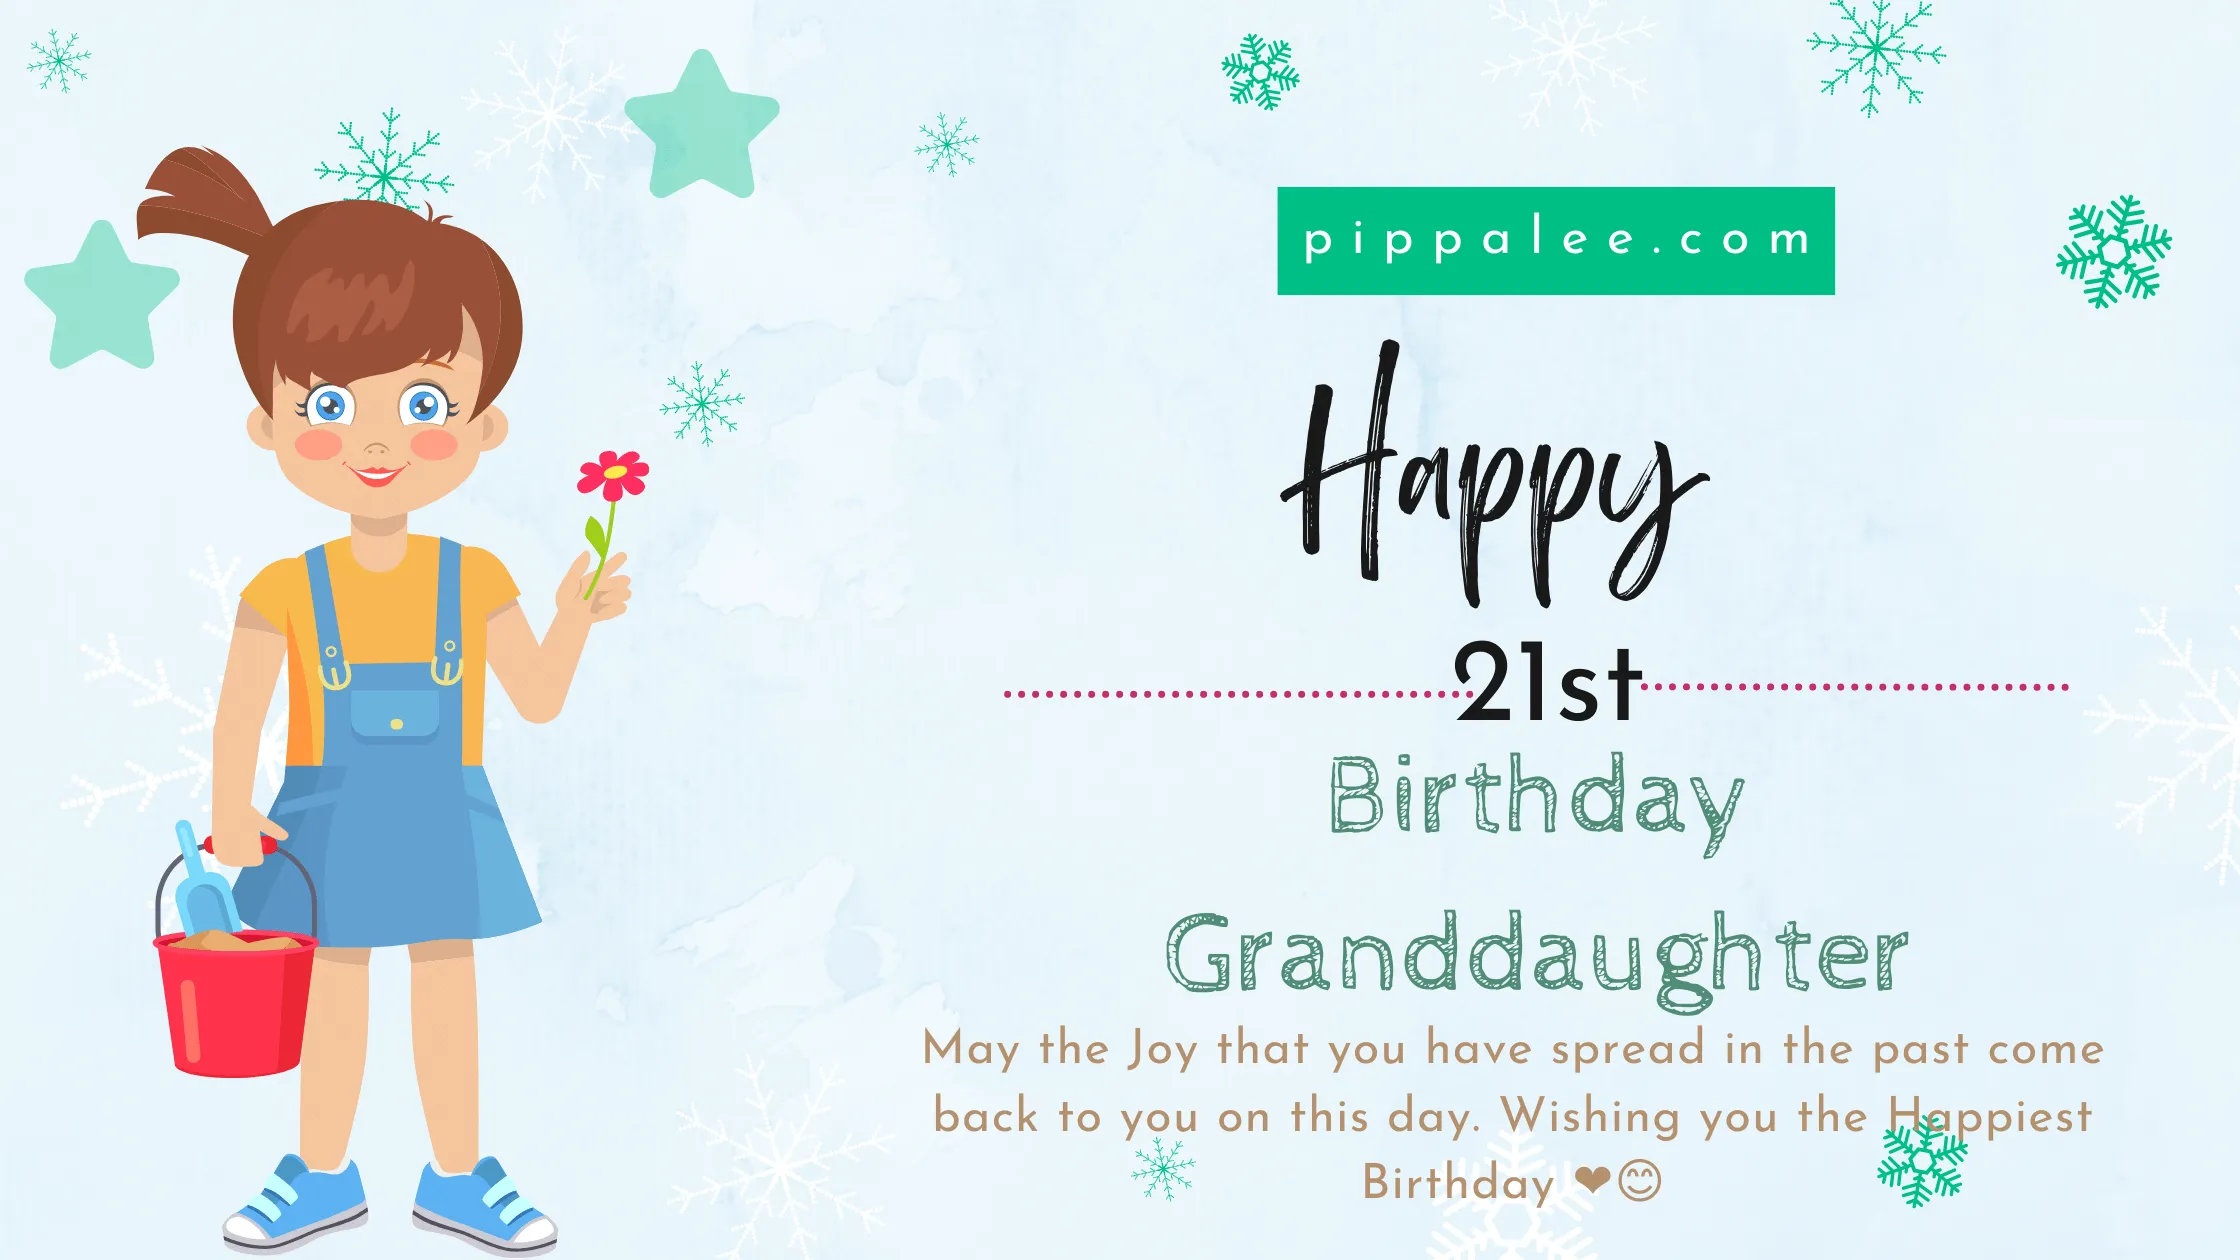 Happy 21st Birthday Granddaughter - Wishes & Messages